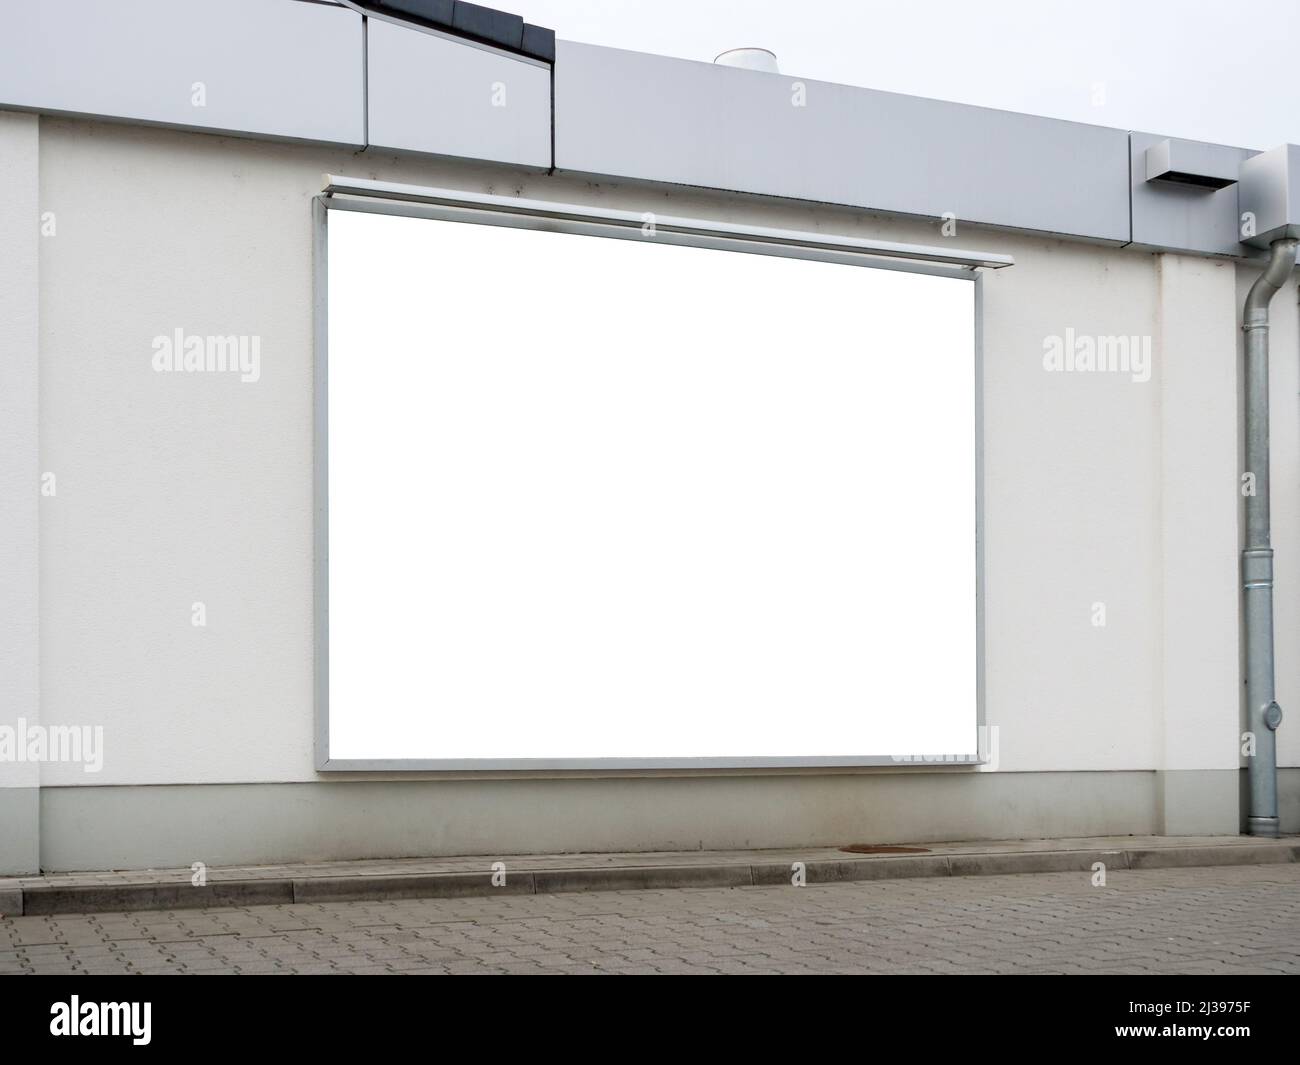 Blank advertising board on a wall of a super market building. Empty place for marketing ads. Mockup of a banner frame outdoors on a facade. Stock Photo